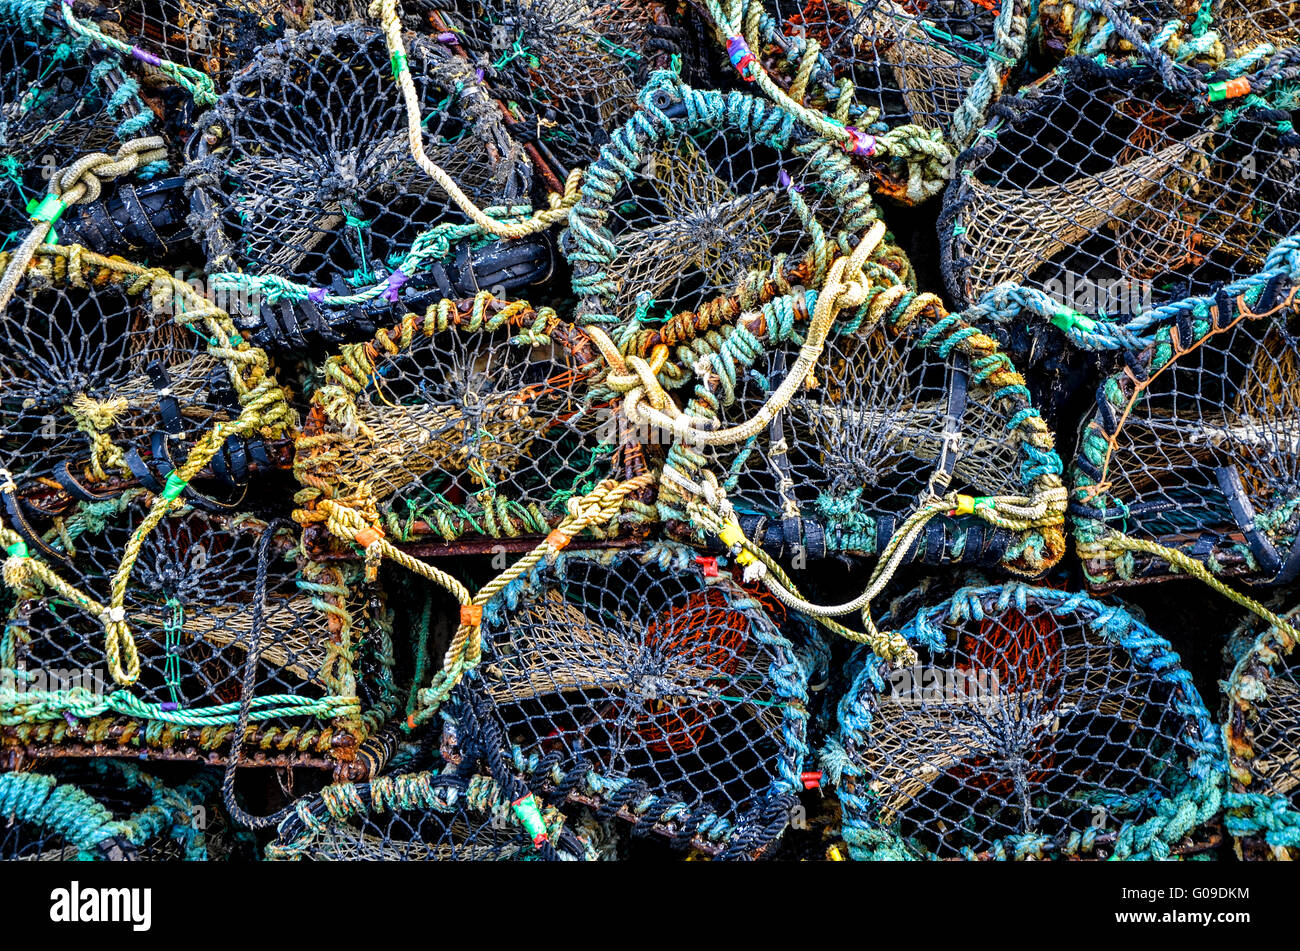 lobster trap Stock Photo